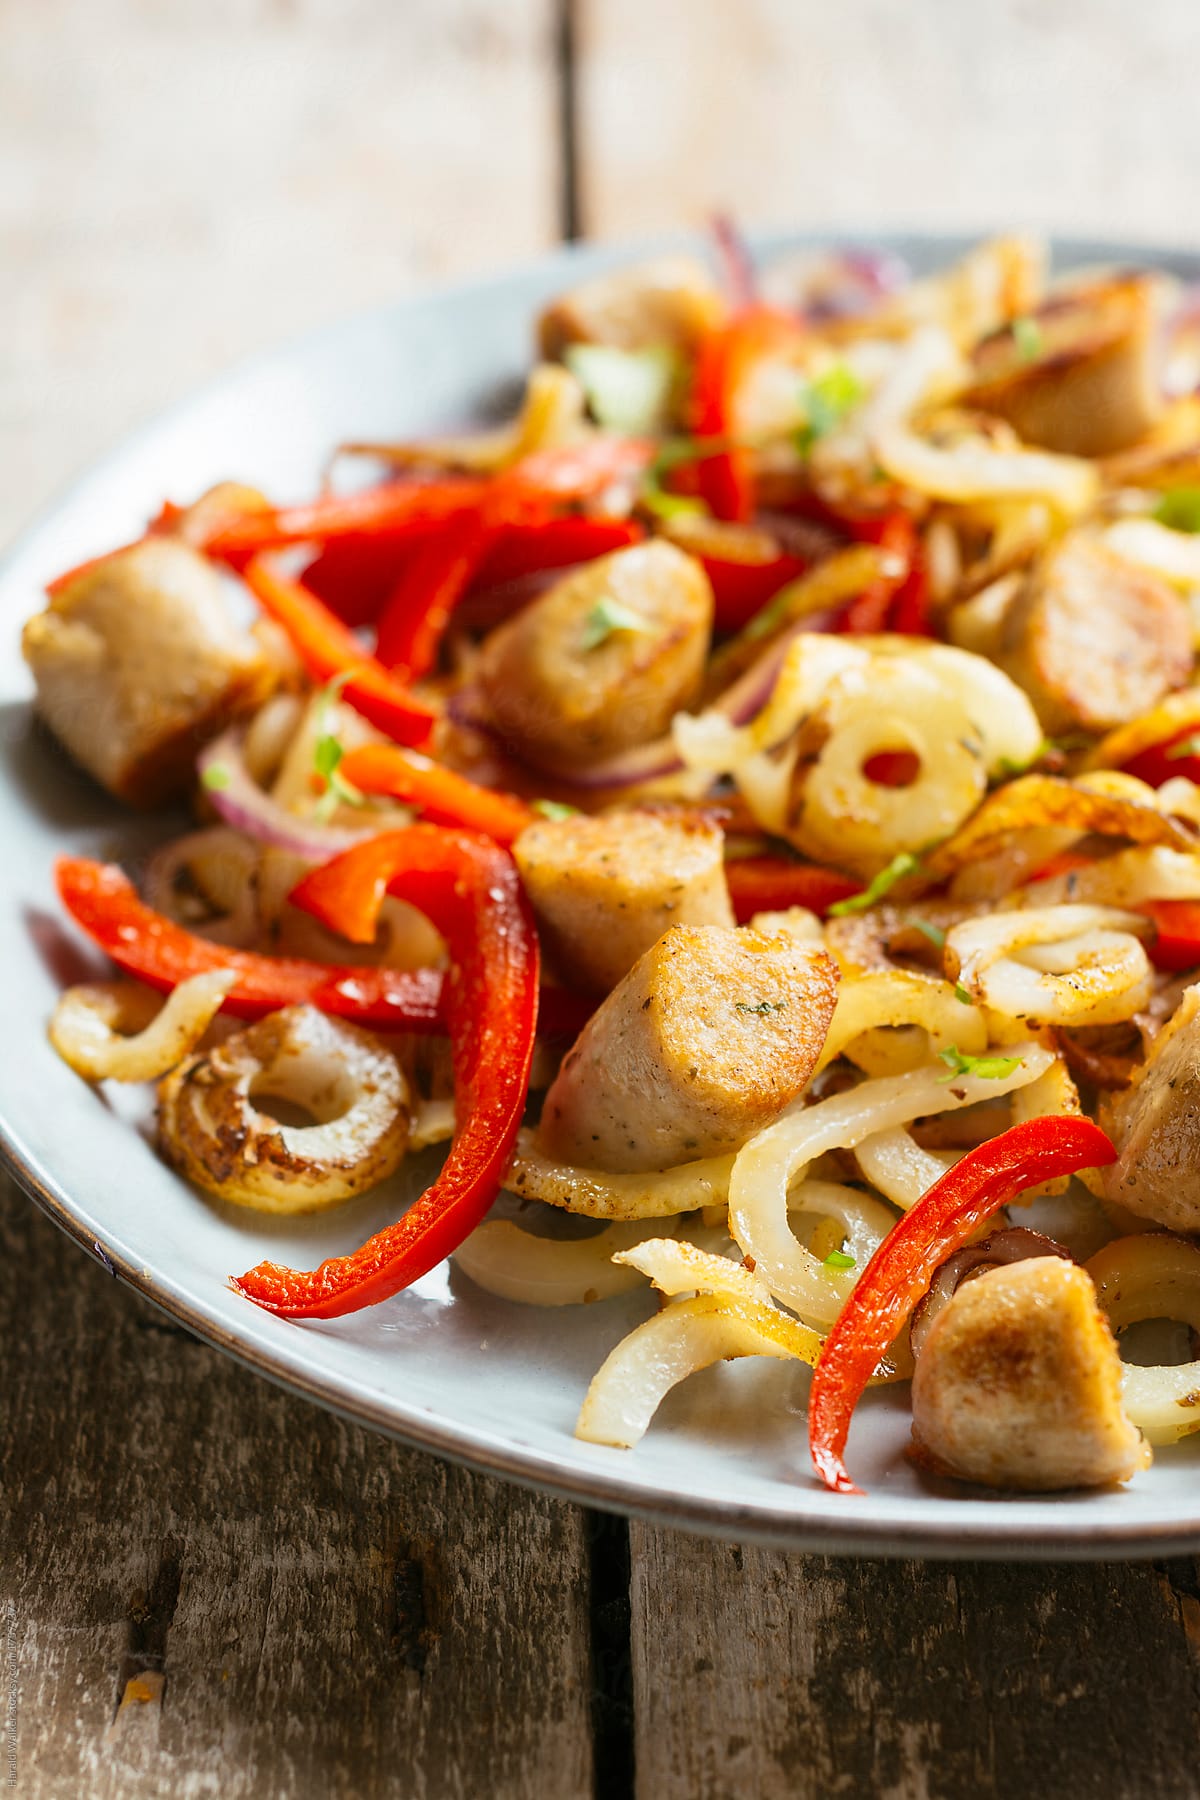 Roasted Spiralized Potatoes with Peppers and Vegan Sausage